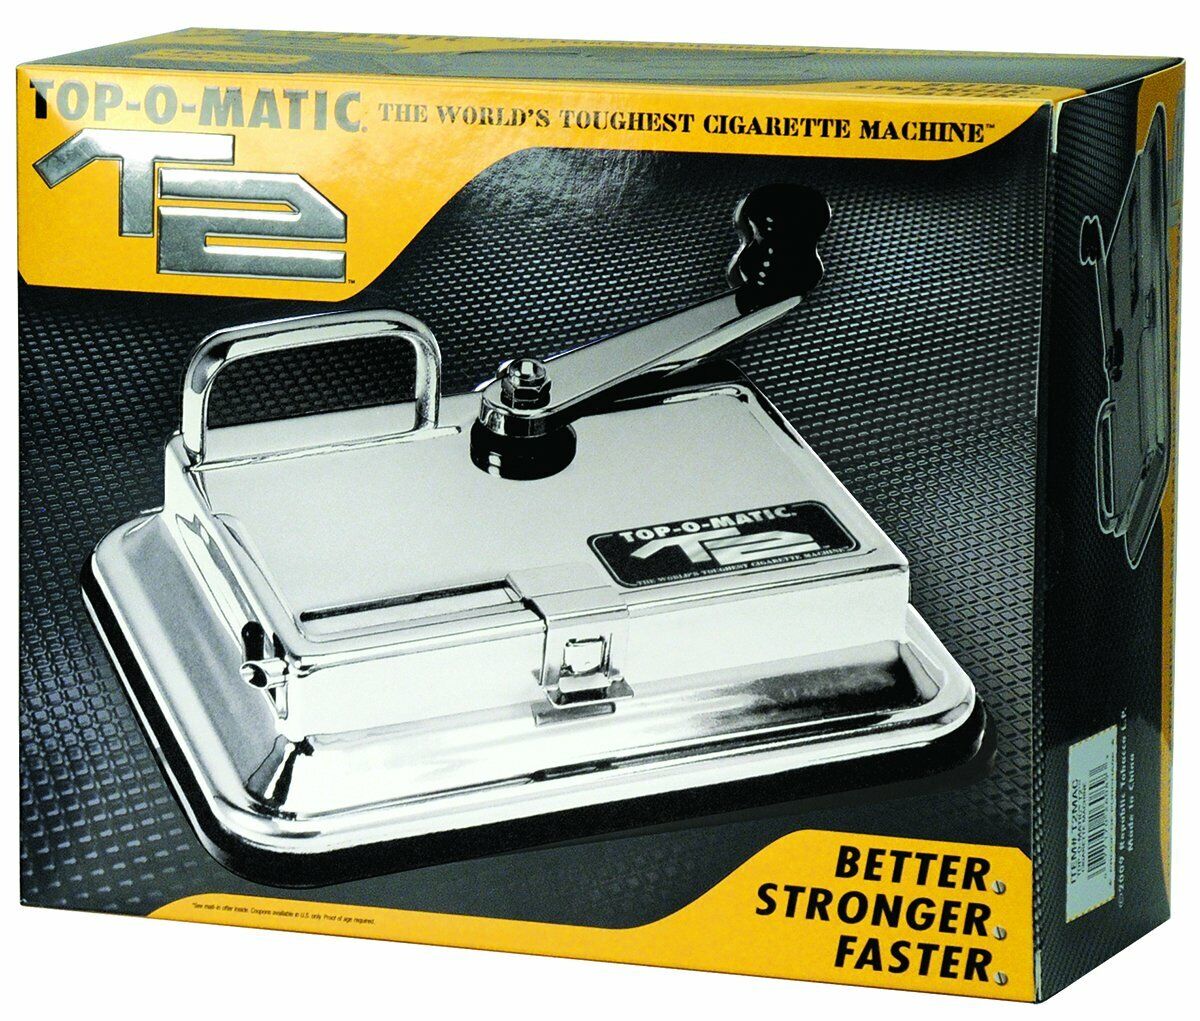 T2 Top-O-Matic Cigarette Rolling Machine - New - Free Fast Shipping. Available Now for 73.99